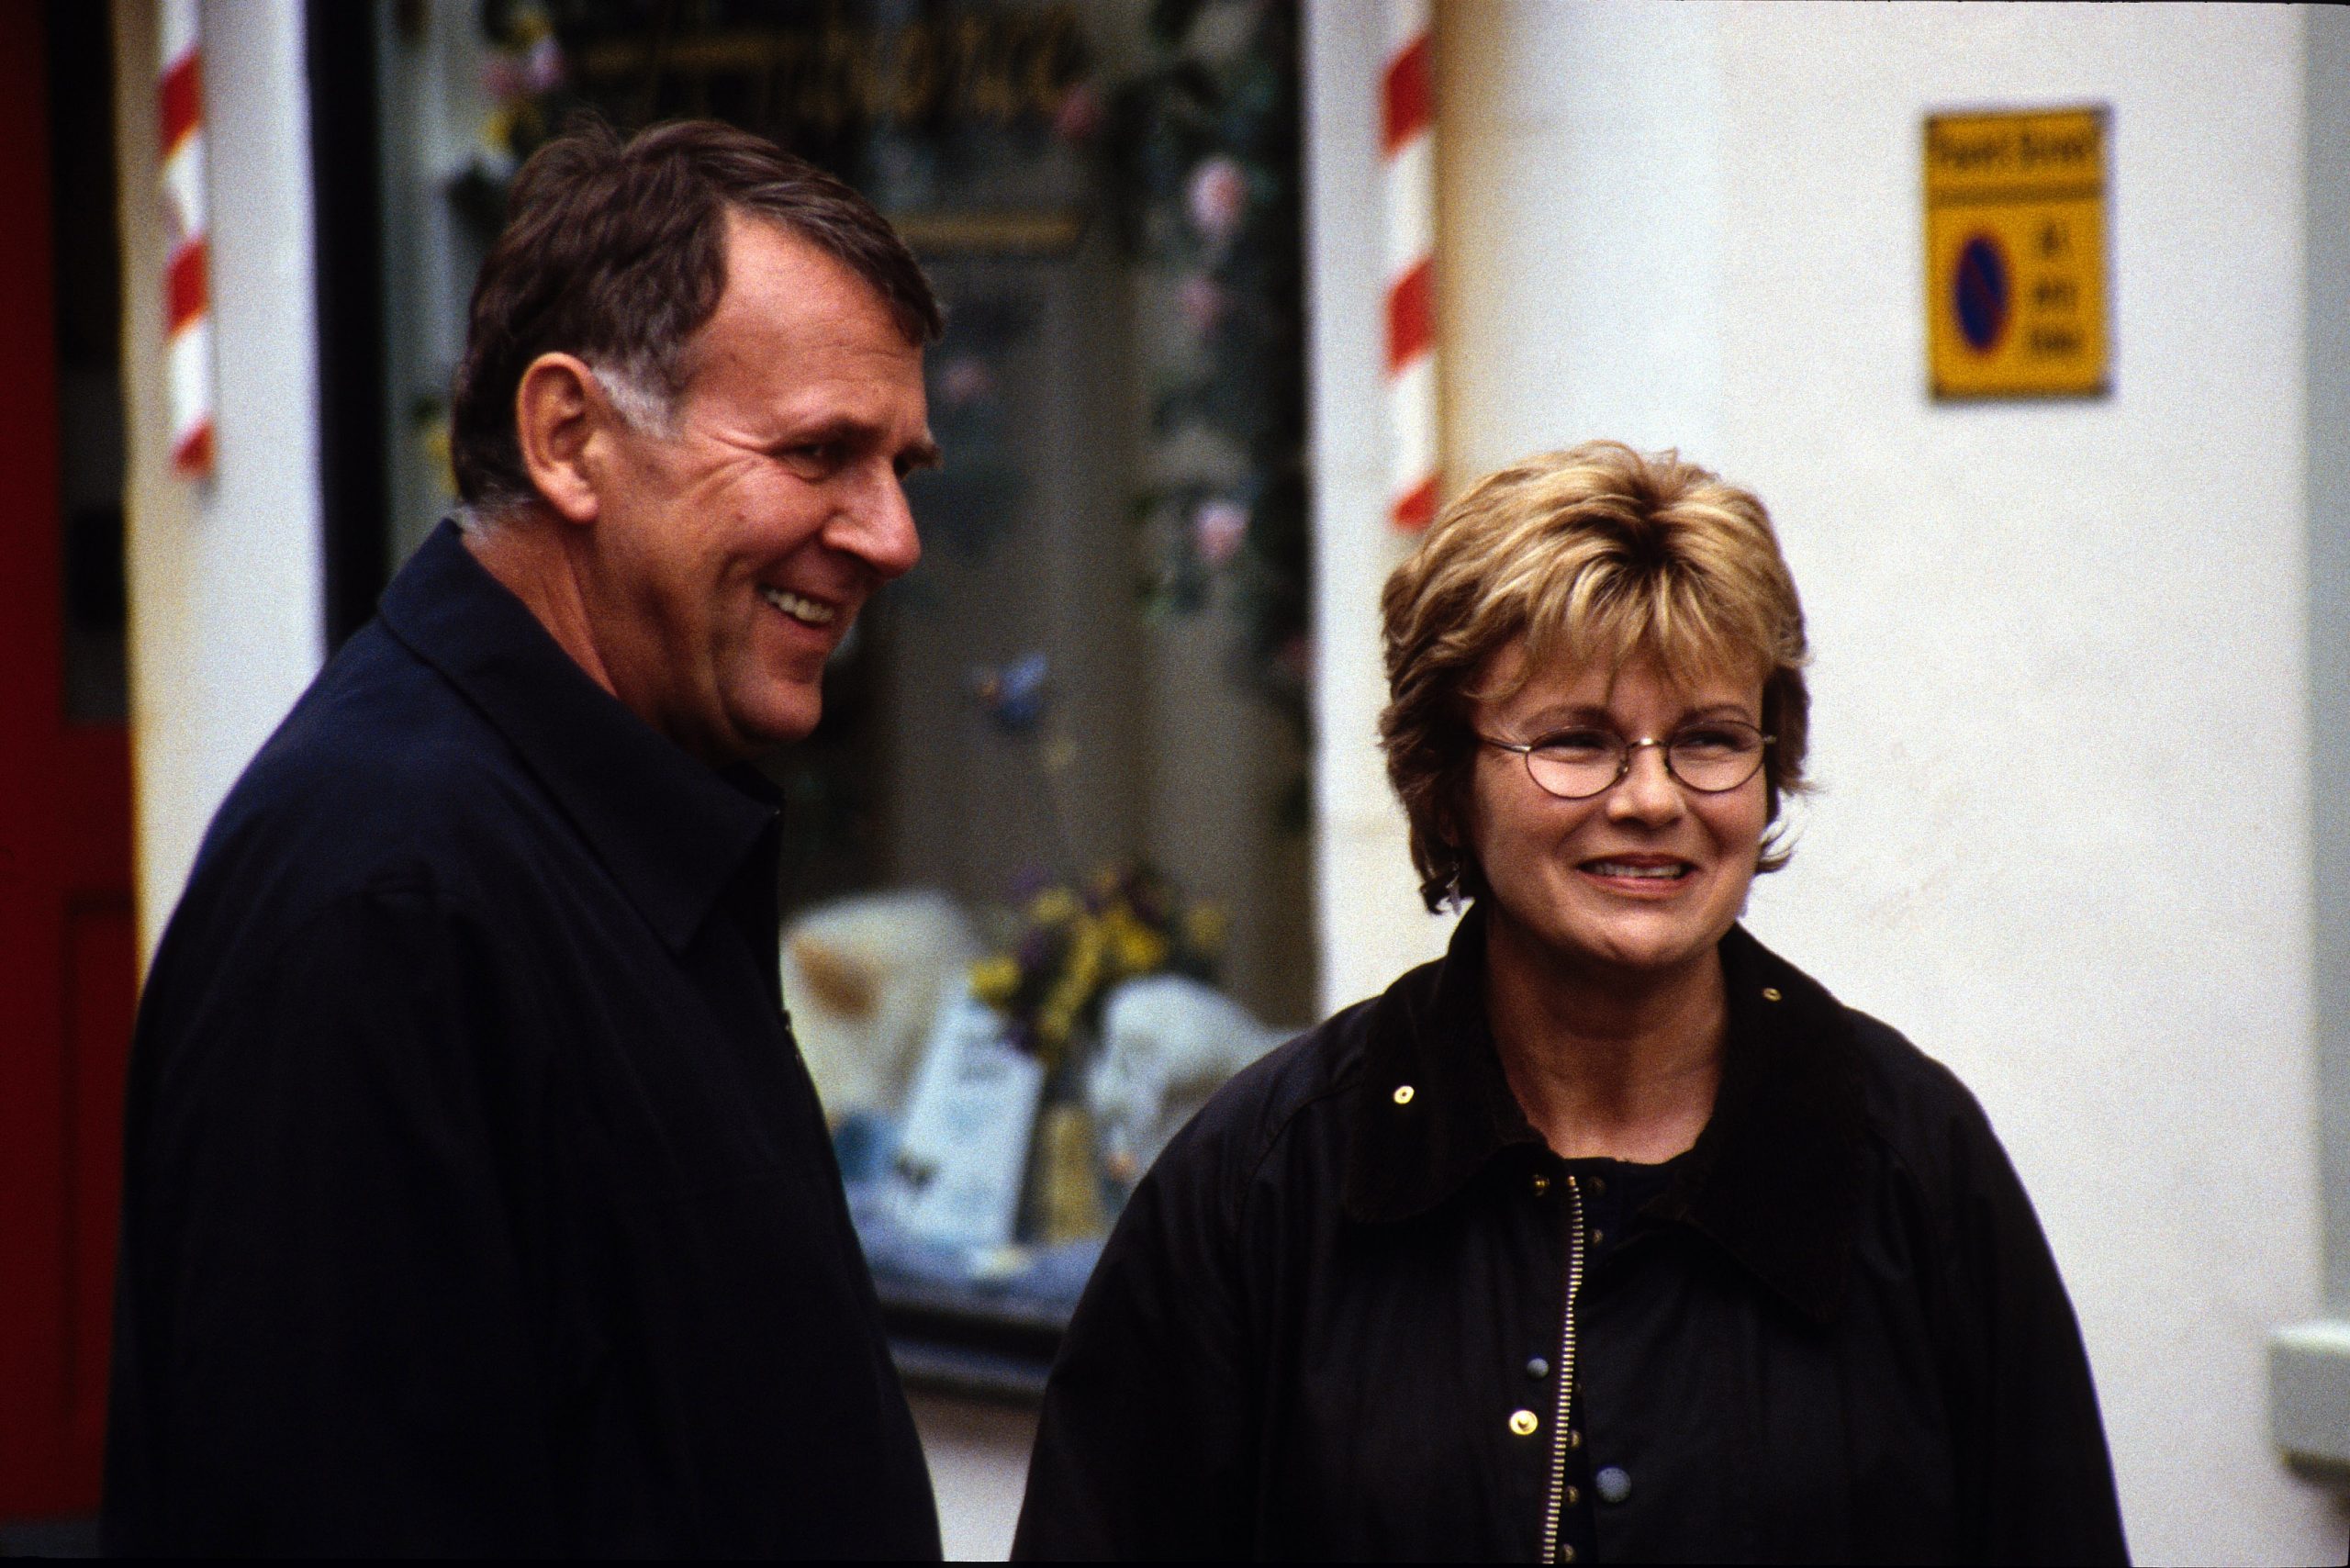 Before You Go starring Tom Wilkinson and Julie Walters